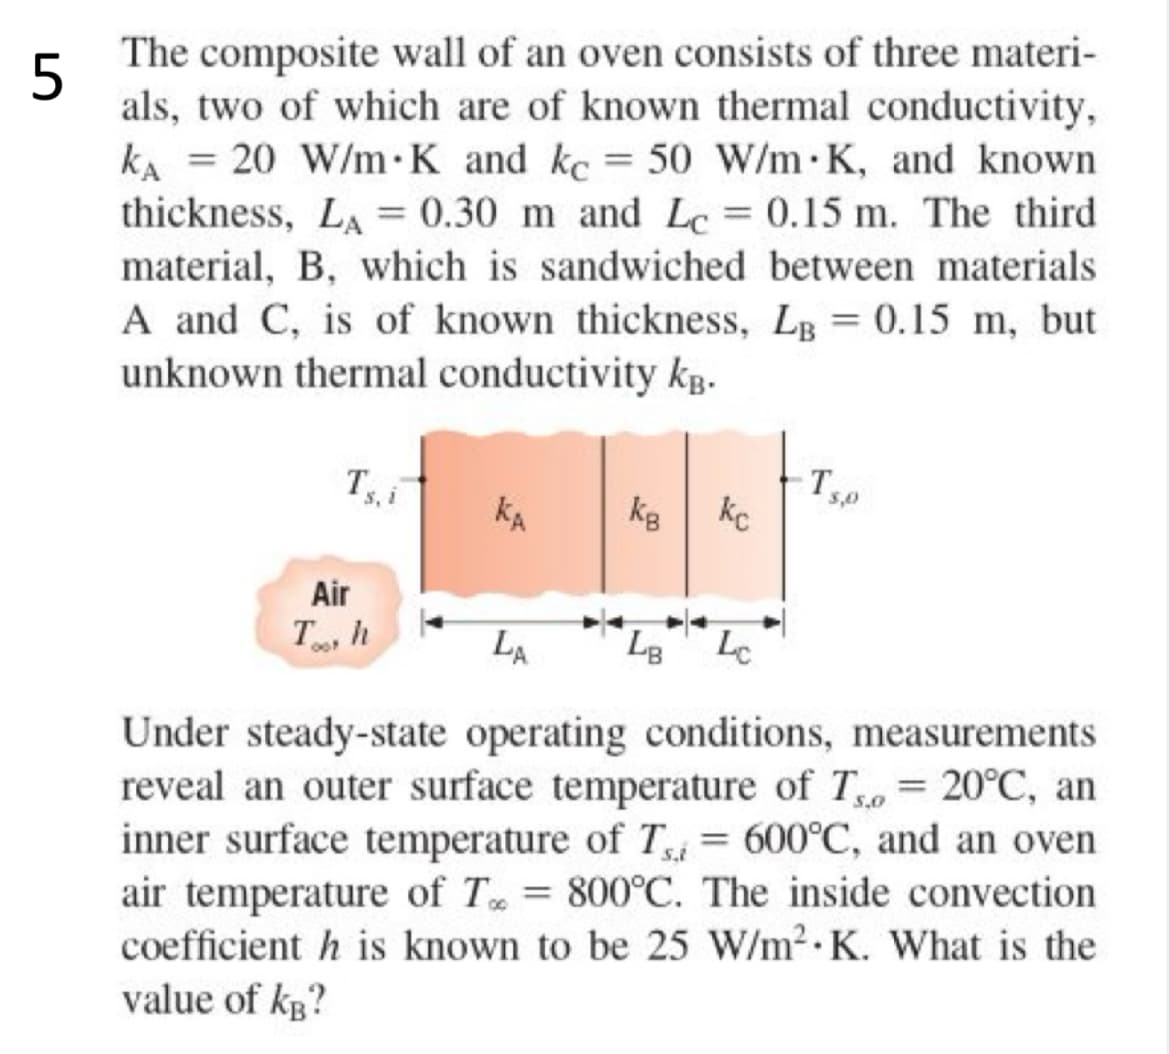 5
The composite wall of an oven consists of three materi-
als, two of which are of known thermal conductivity,
KA = 20 W/m K and kc = 50 W/m K, and known
thickness, LA = 0.30 m and Lc= 0.15 m. The third
material, B, which is sandwiched between materials
A and C, is of known thickness, LB = 0.15 m, but
unknown thermal conductivity kB.
Tsi
Air
Th
KA
КВ
kc
3,0
LA
LB Lc
5,0
Under steady-state operating conditions, measurements
reveal an outer surface temperature of T = 20°C, an
inner surface temperature of Ti = 600°C, and an oven
air temperature of T = 800°C. The inside convection
coefficient h is known to be 25 W/m² K. What is the
value of kB?